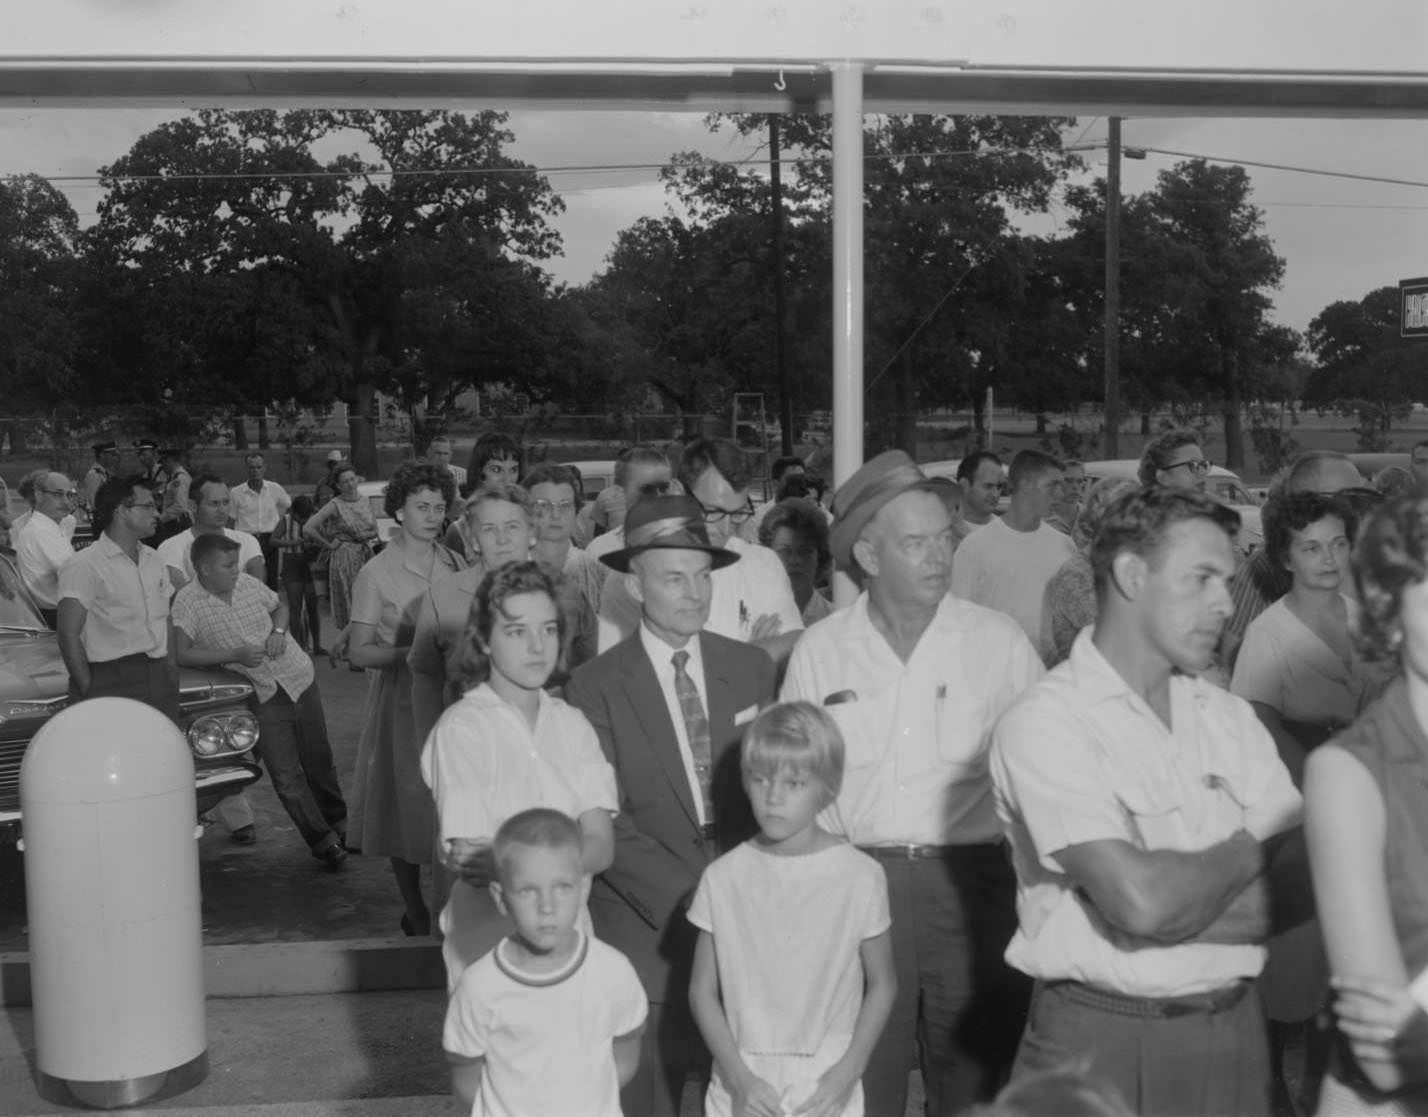 Crowd standing in front of Kentucky Fried Chicken stand, Austin, 1960